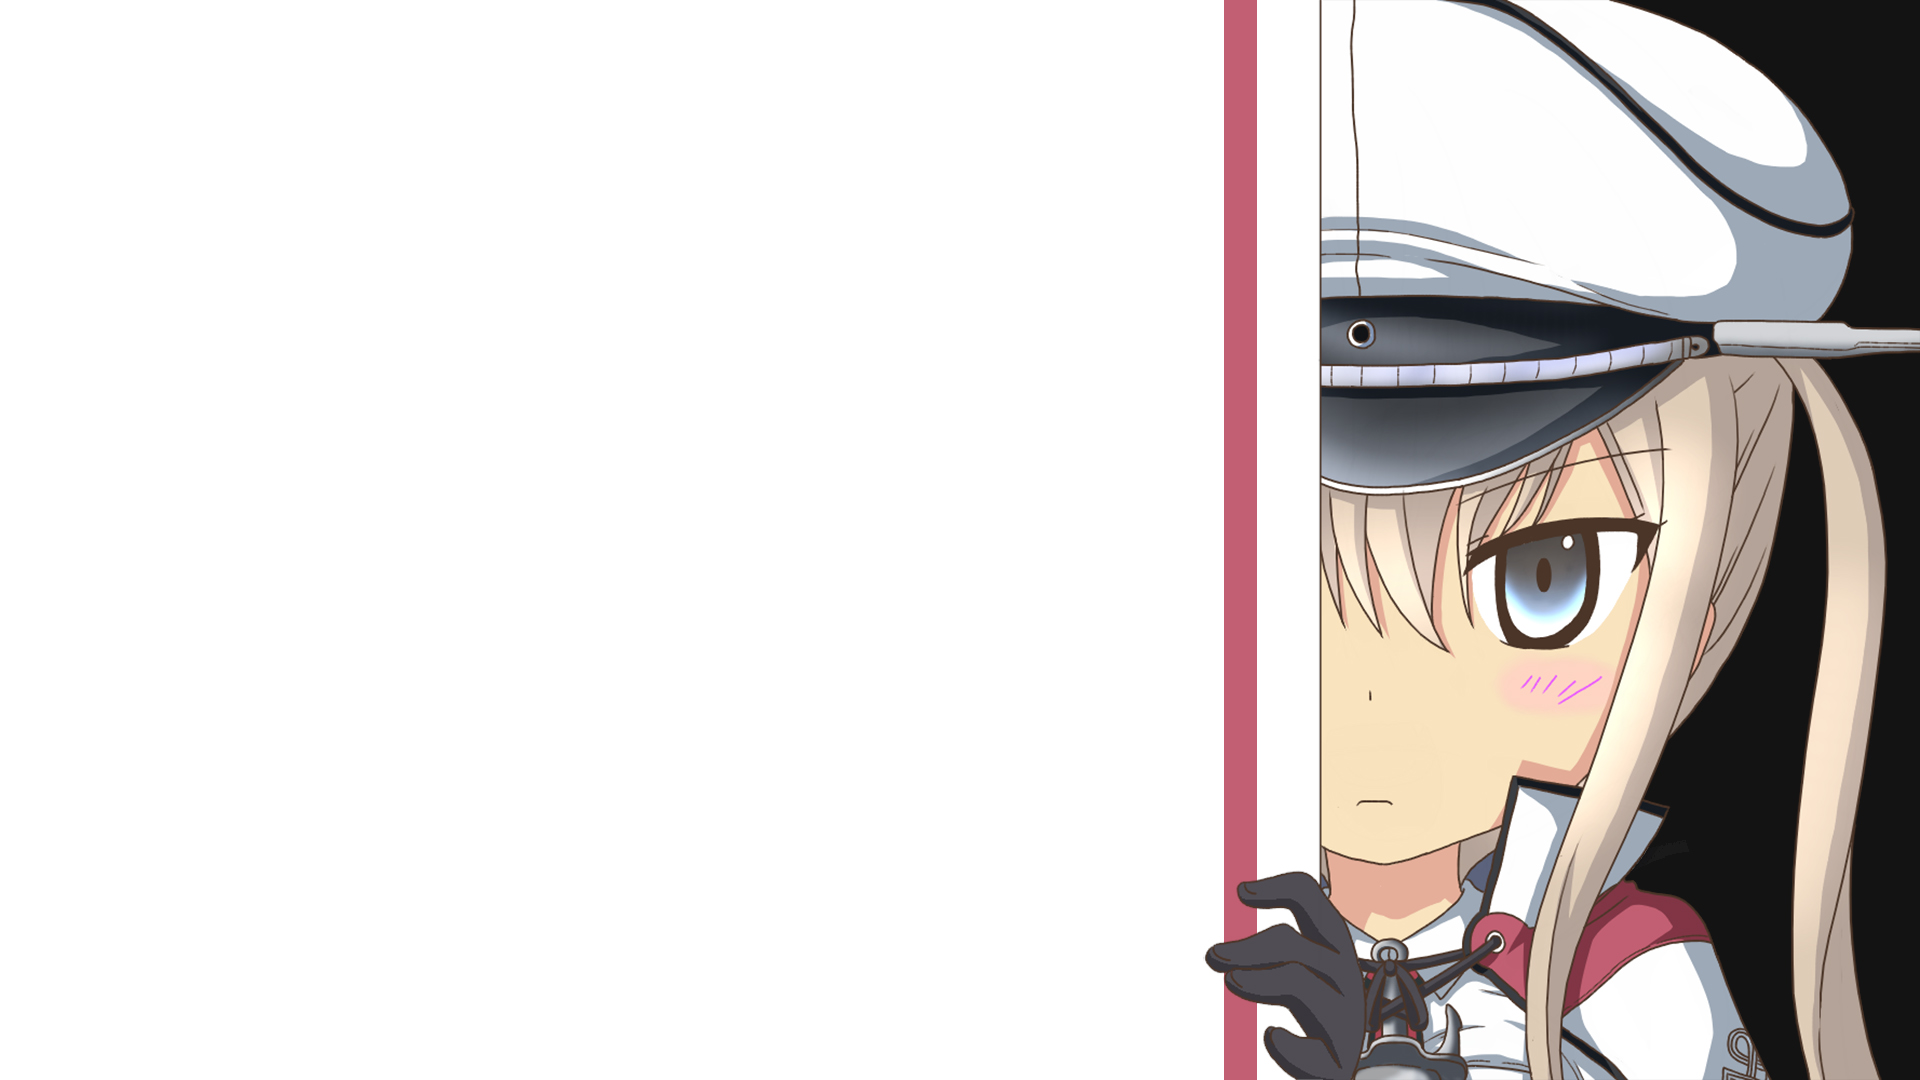 Kantai Collection Graf Zeppelin KanColle One Eye Obstructed Military Hat Minimalism Anime Girls Blus 1920x1080